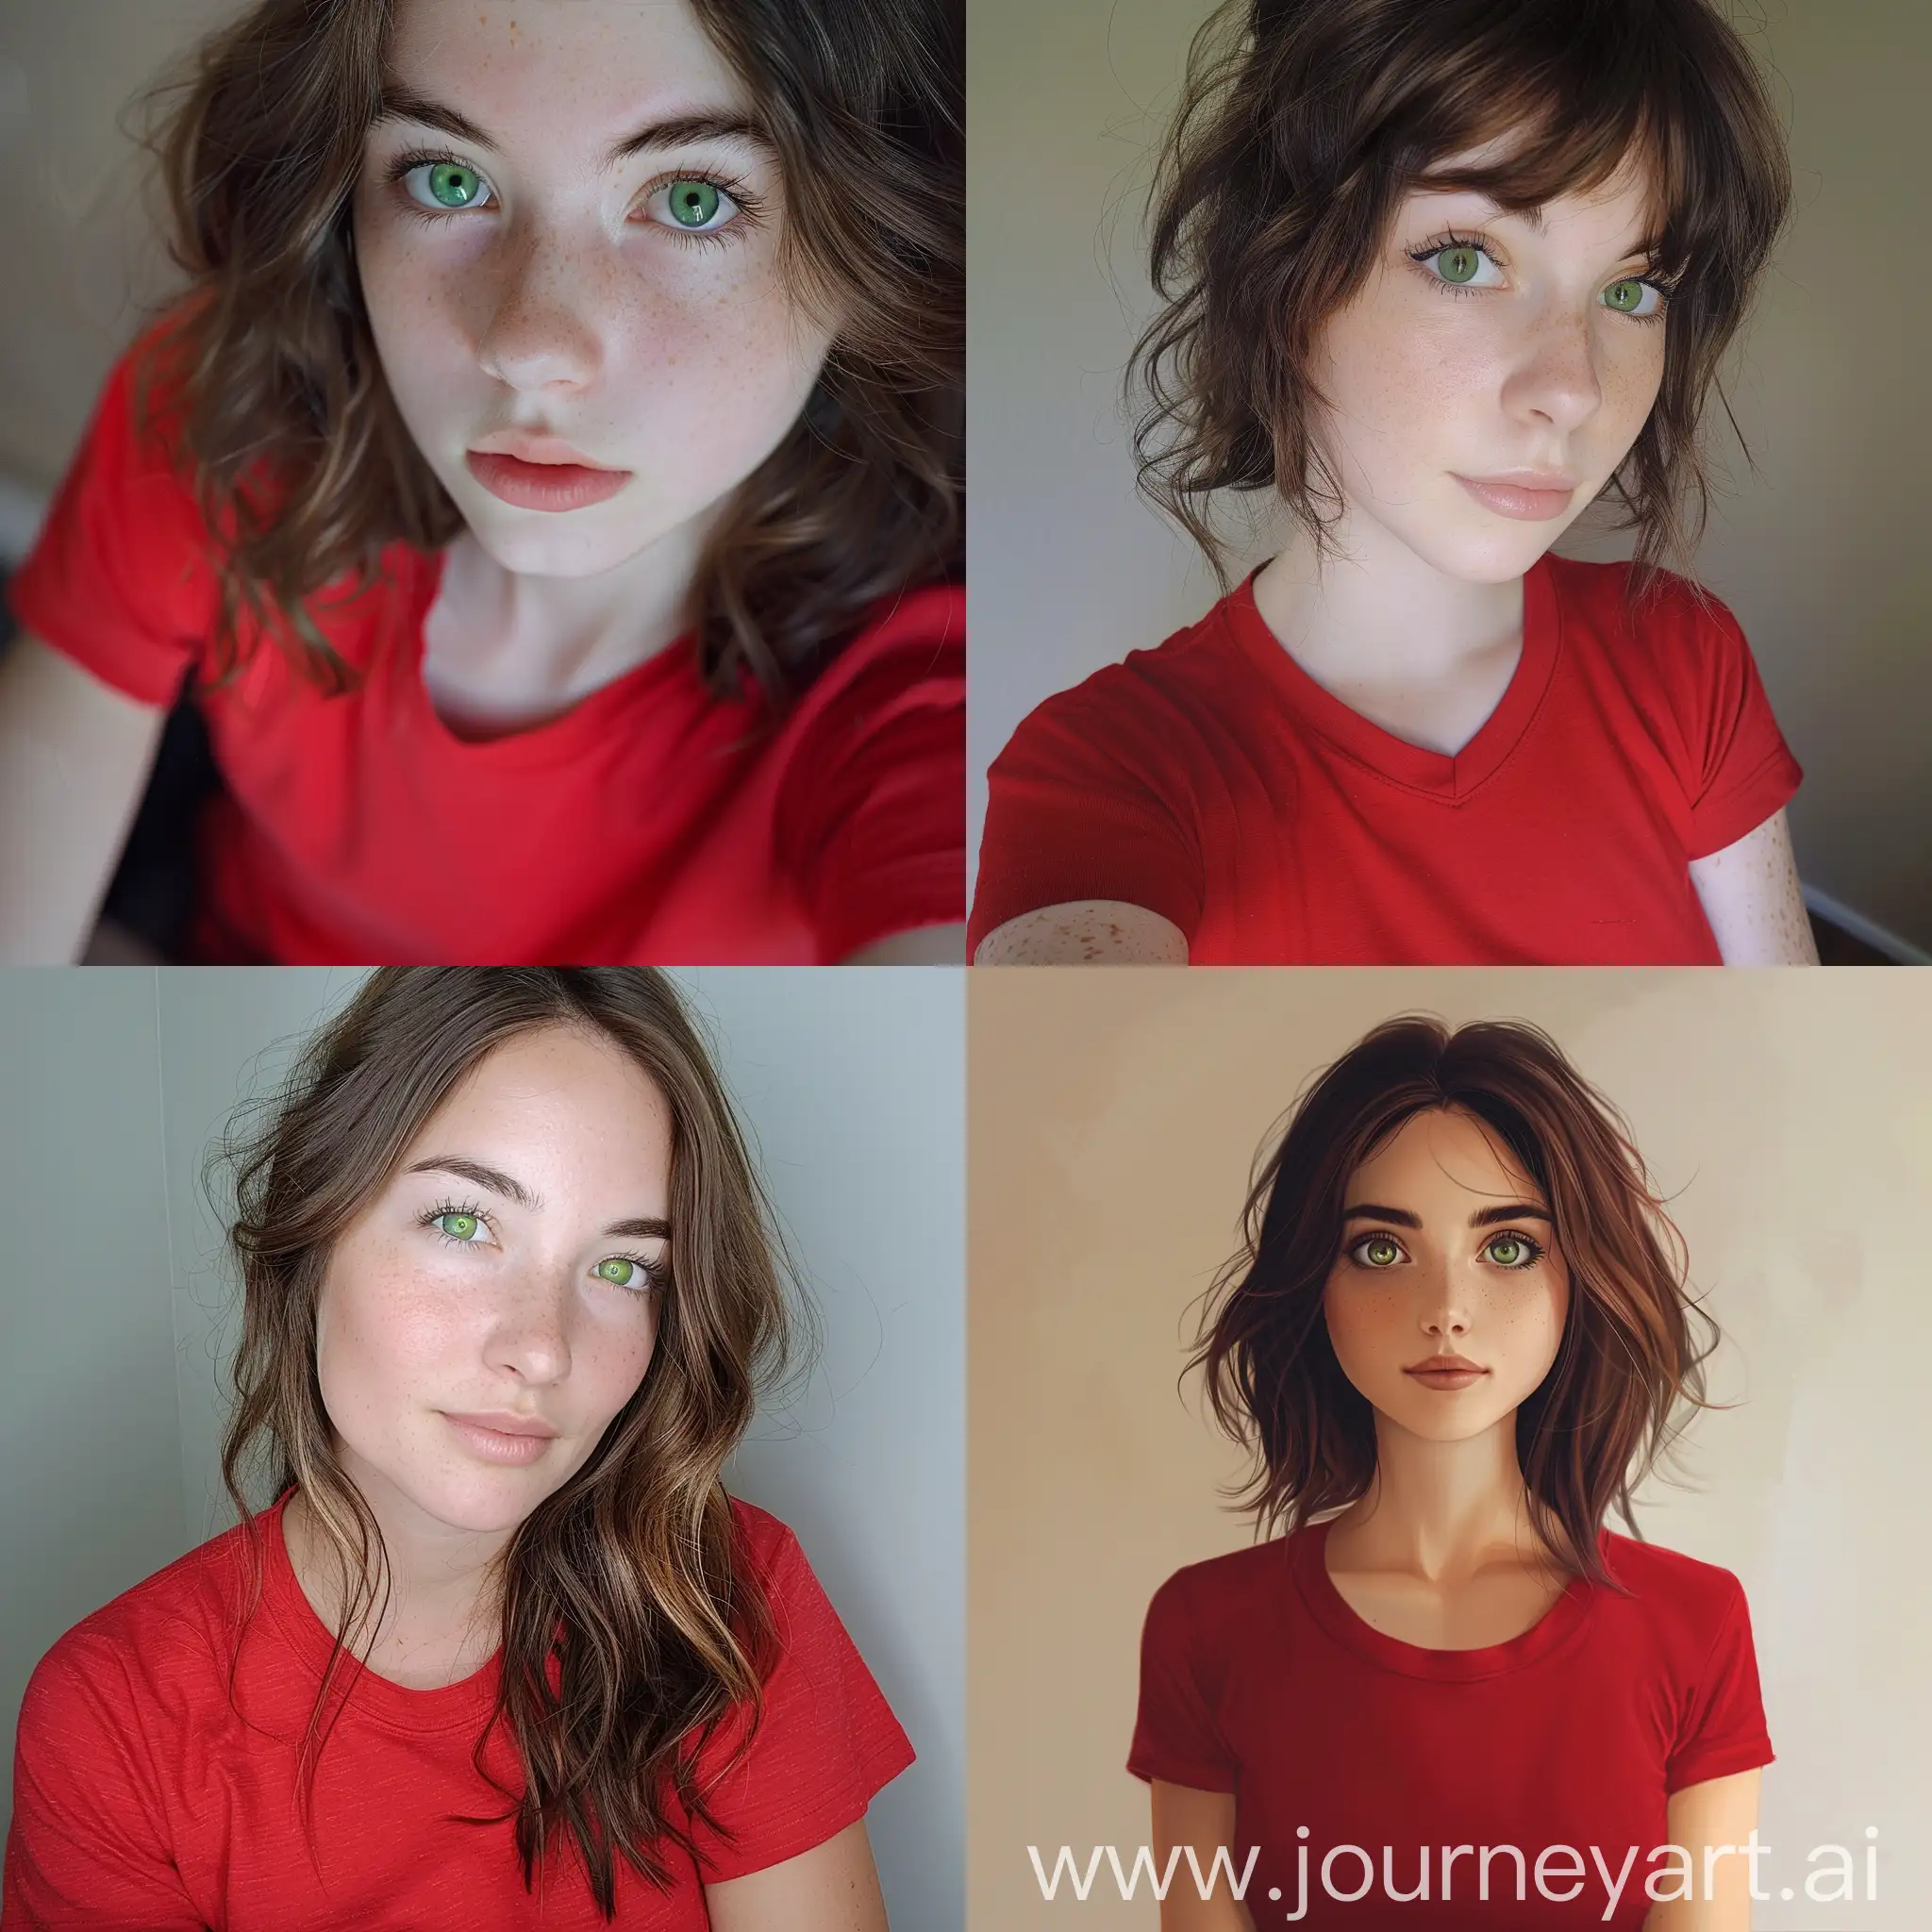 Adorable-BrownHaired-Girl-in-Red-TShirt-Captivating-Portrait